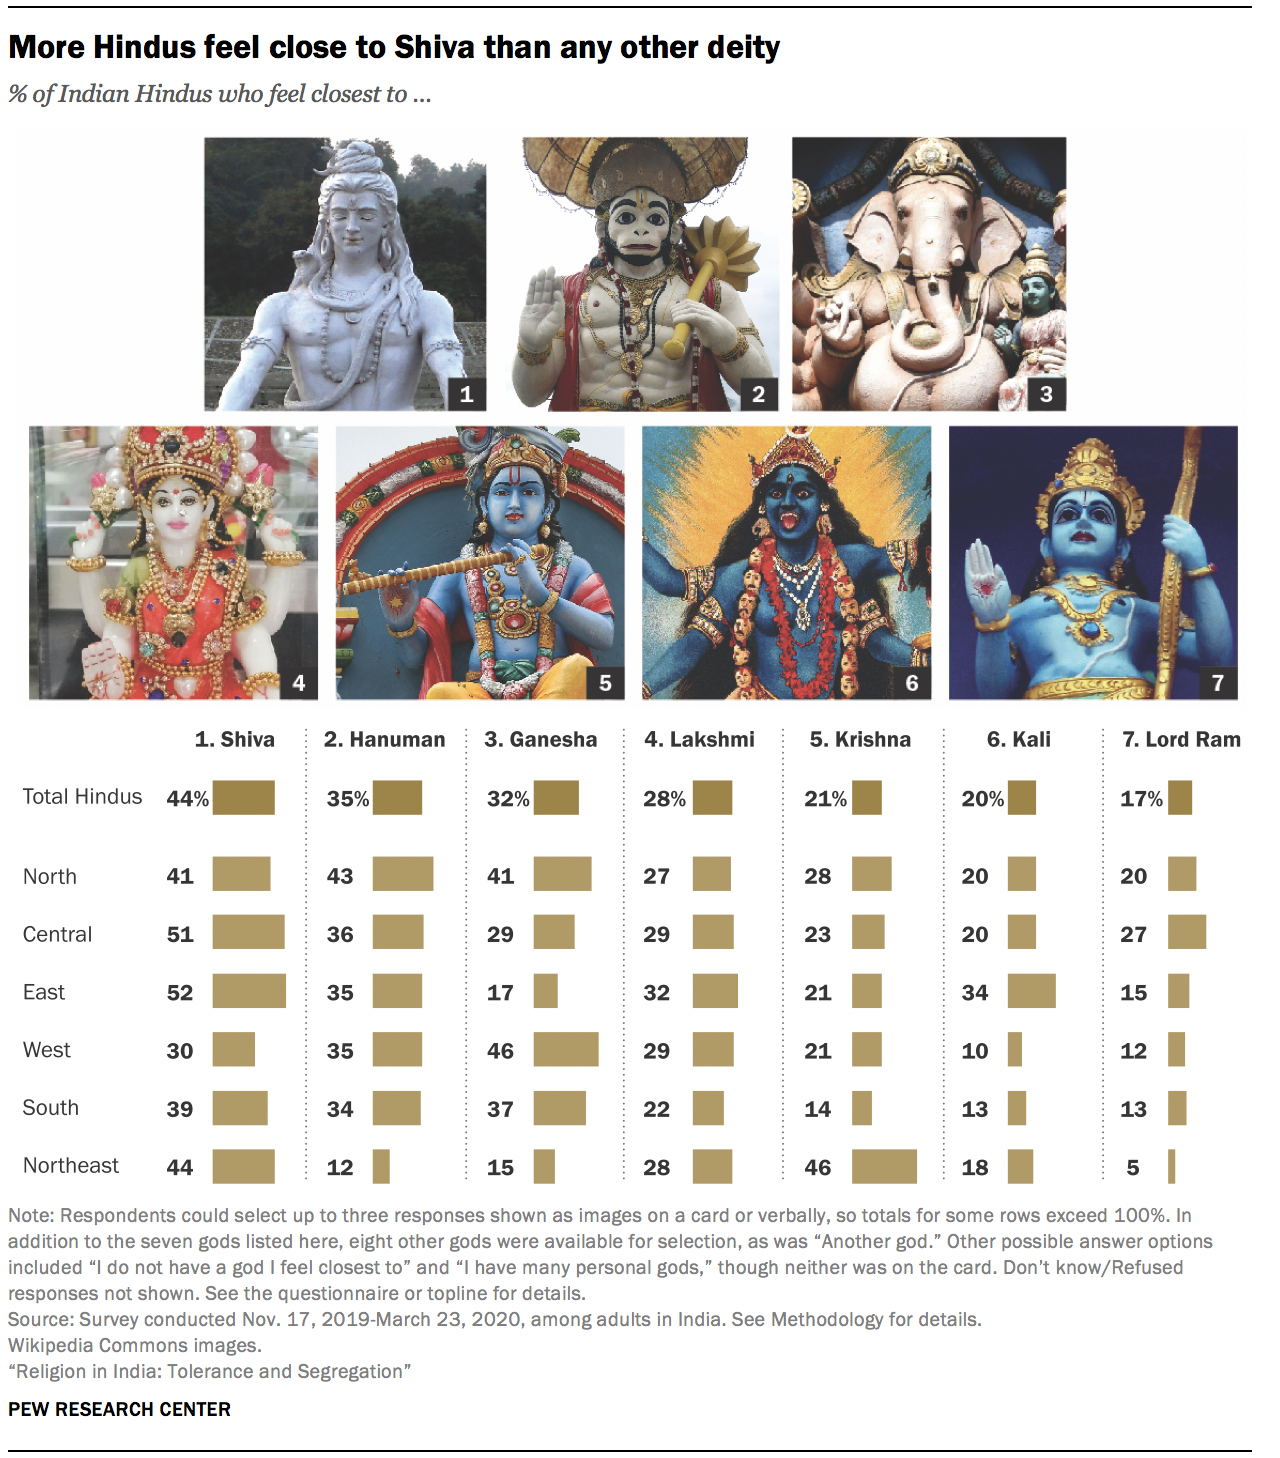 More Hindus feel close to Shiva than any other deity 